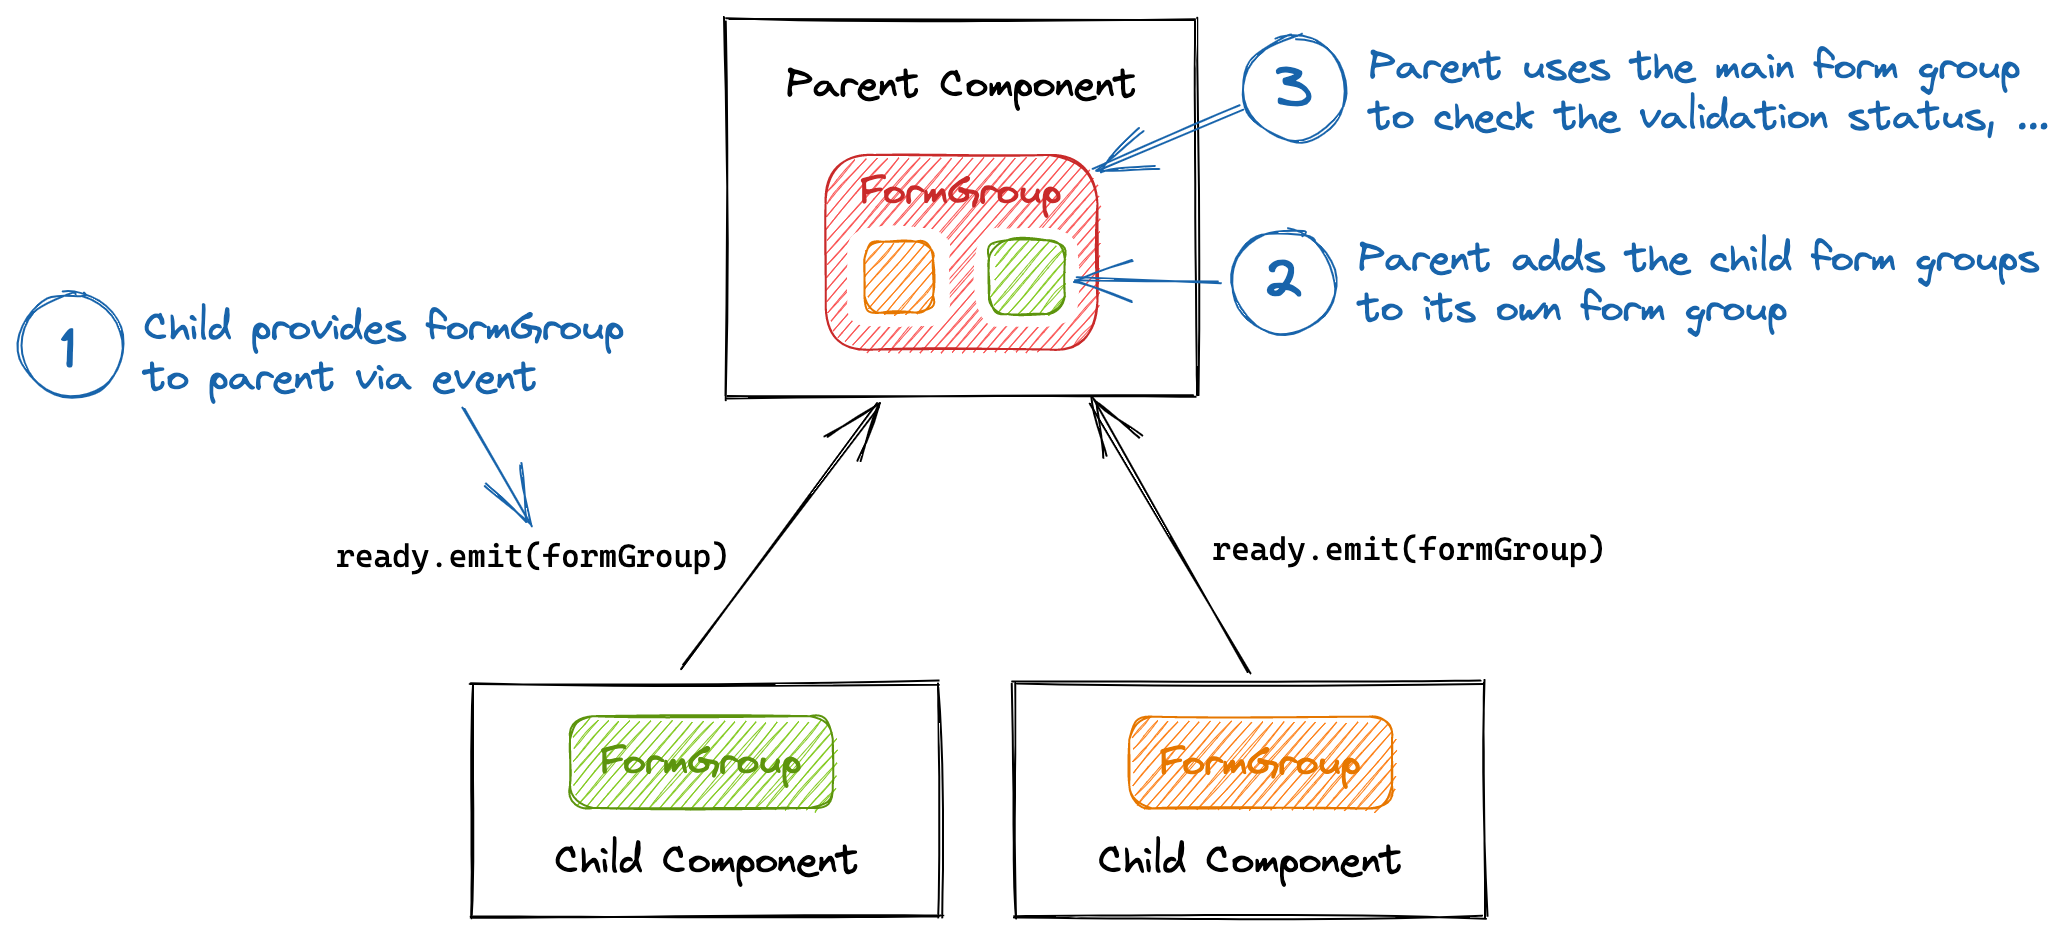 Provide form group to parent